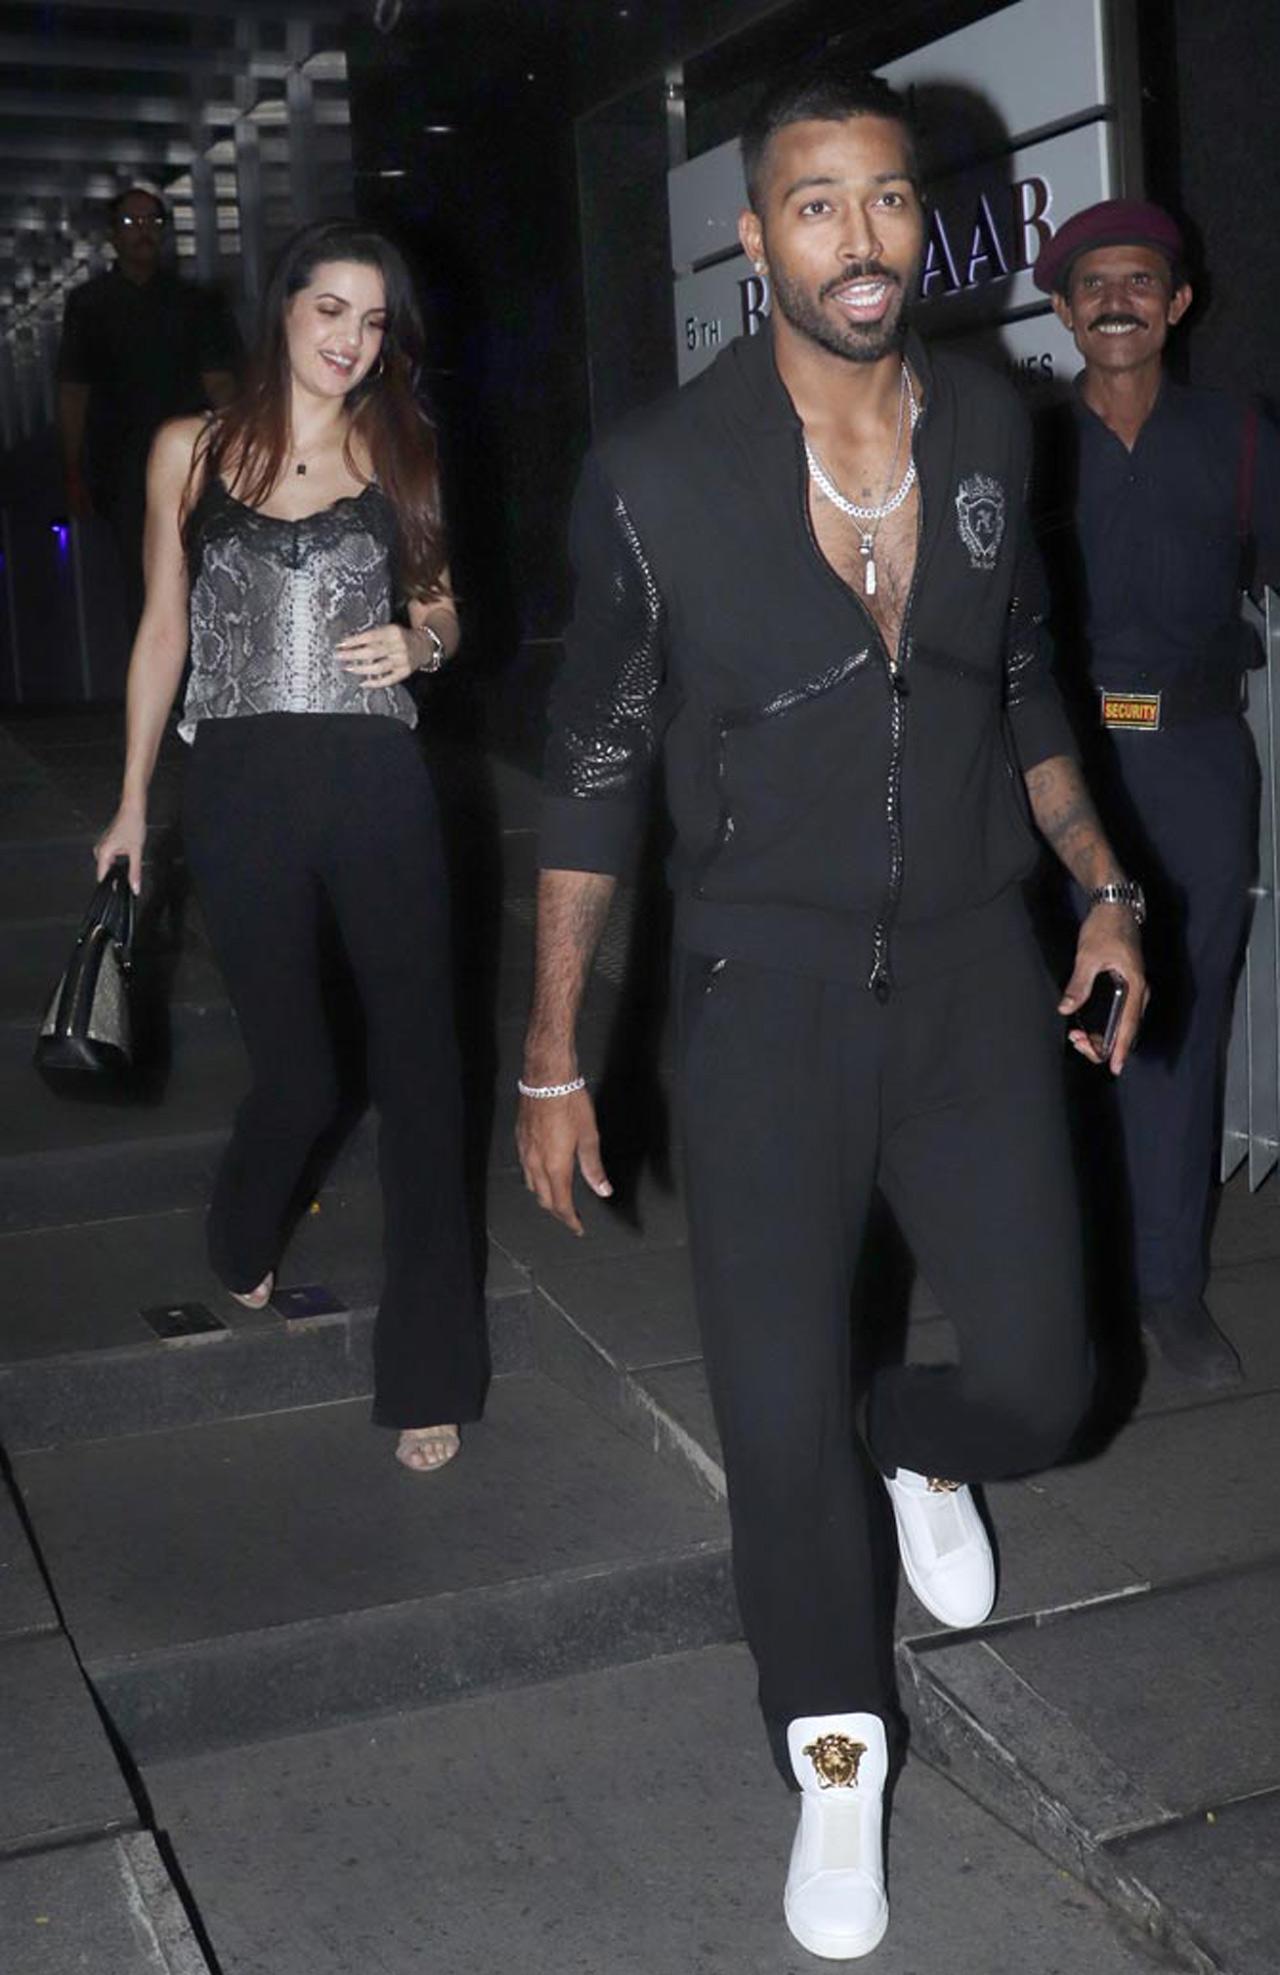 On New Year's Eve, Hardik Pandya shared a photo along with Natasa Stankovic with the both of them dressed in formal attire and wrote, 'Starting the year with my firework'. This was to confirm that the couple were dating. In pic - with Natasa Stankovic